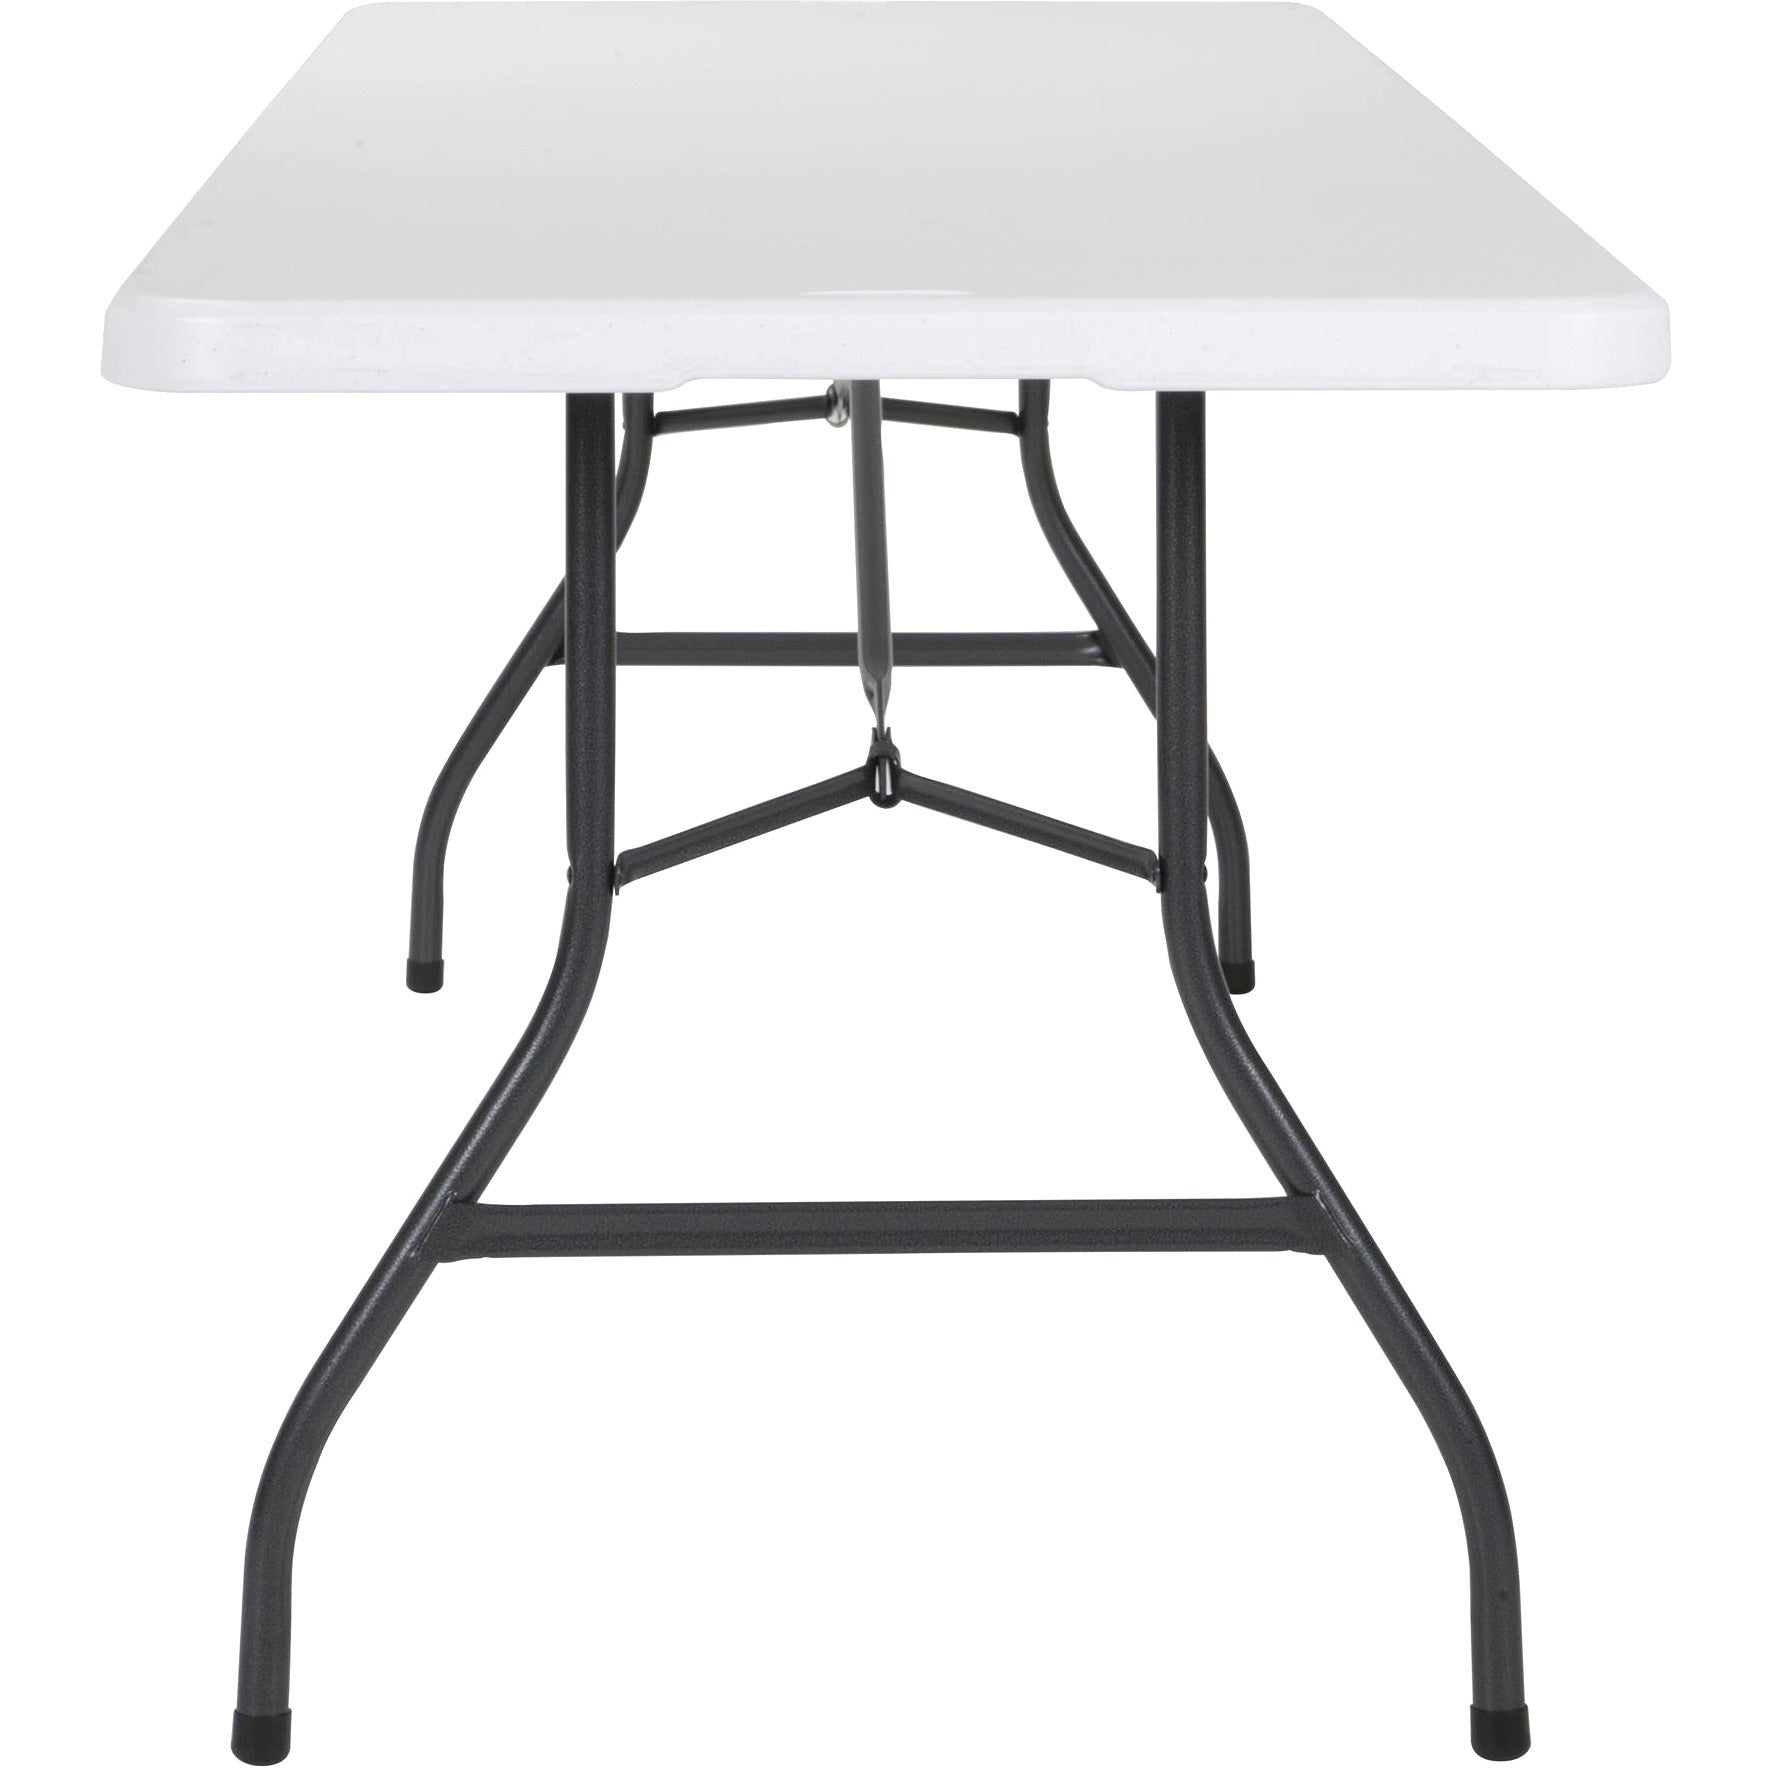 cosco-fold-in-half-blow-molded-table-for-table-toprectangle-top-four-leg-base-4-legs-300-lb-capacity-x-30-table-top-width-x-96-table-top-depth-2925-height-white-1-each_csc14778wsl1x - 4